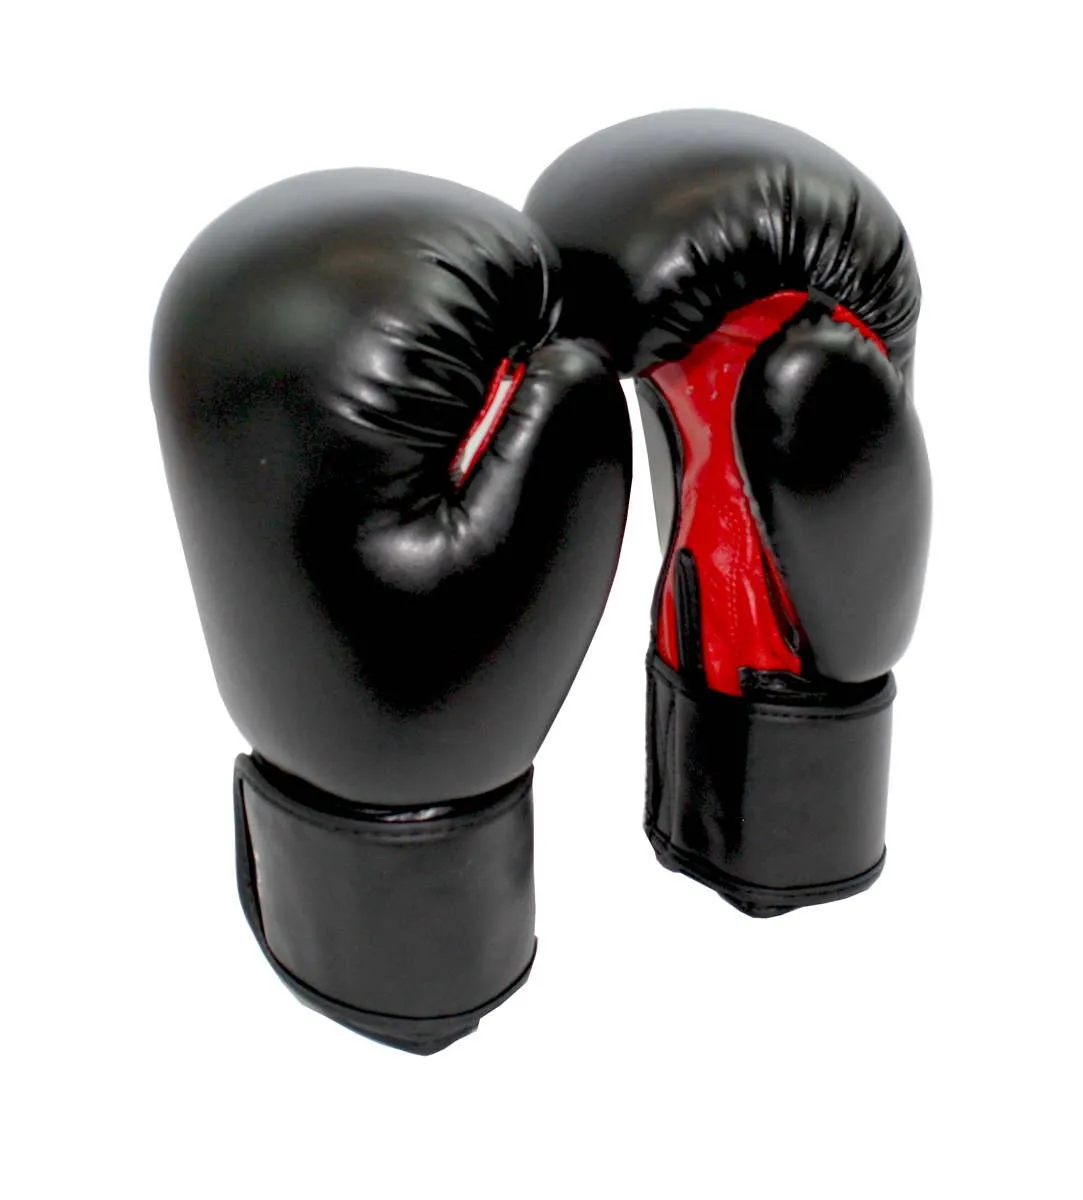 Boxing gloves sparring black red imitation leather with velcro fastener